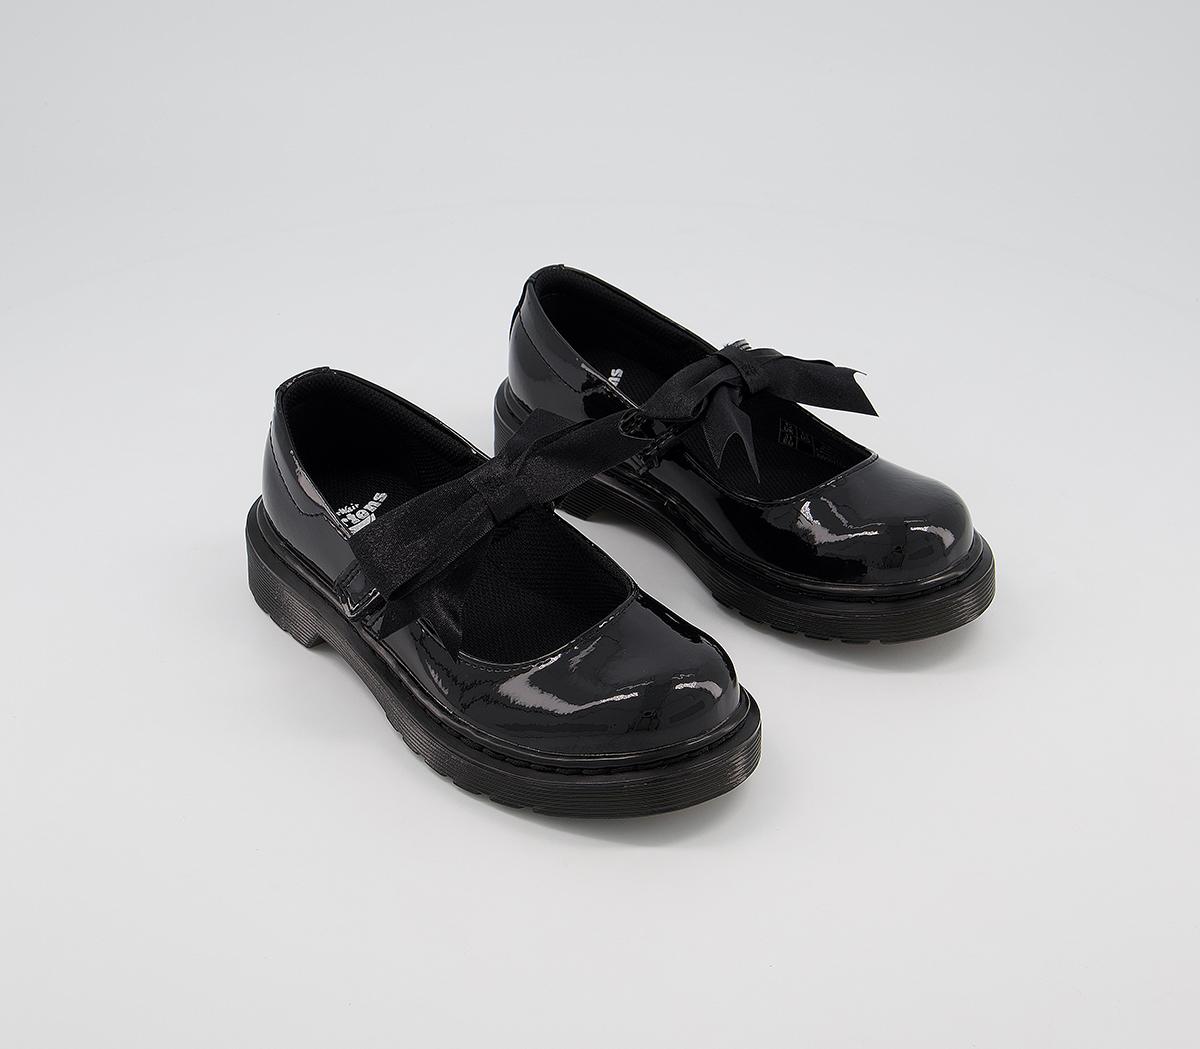 Dr. Martens Kids Maccy Ii Bow Mary Jane Jnr Black Patent Leather, 1 Youth